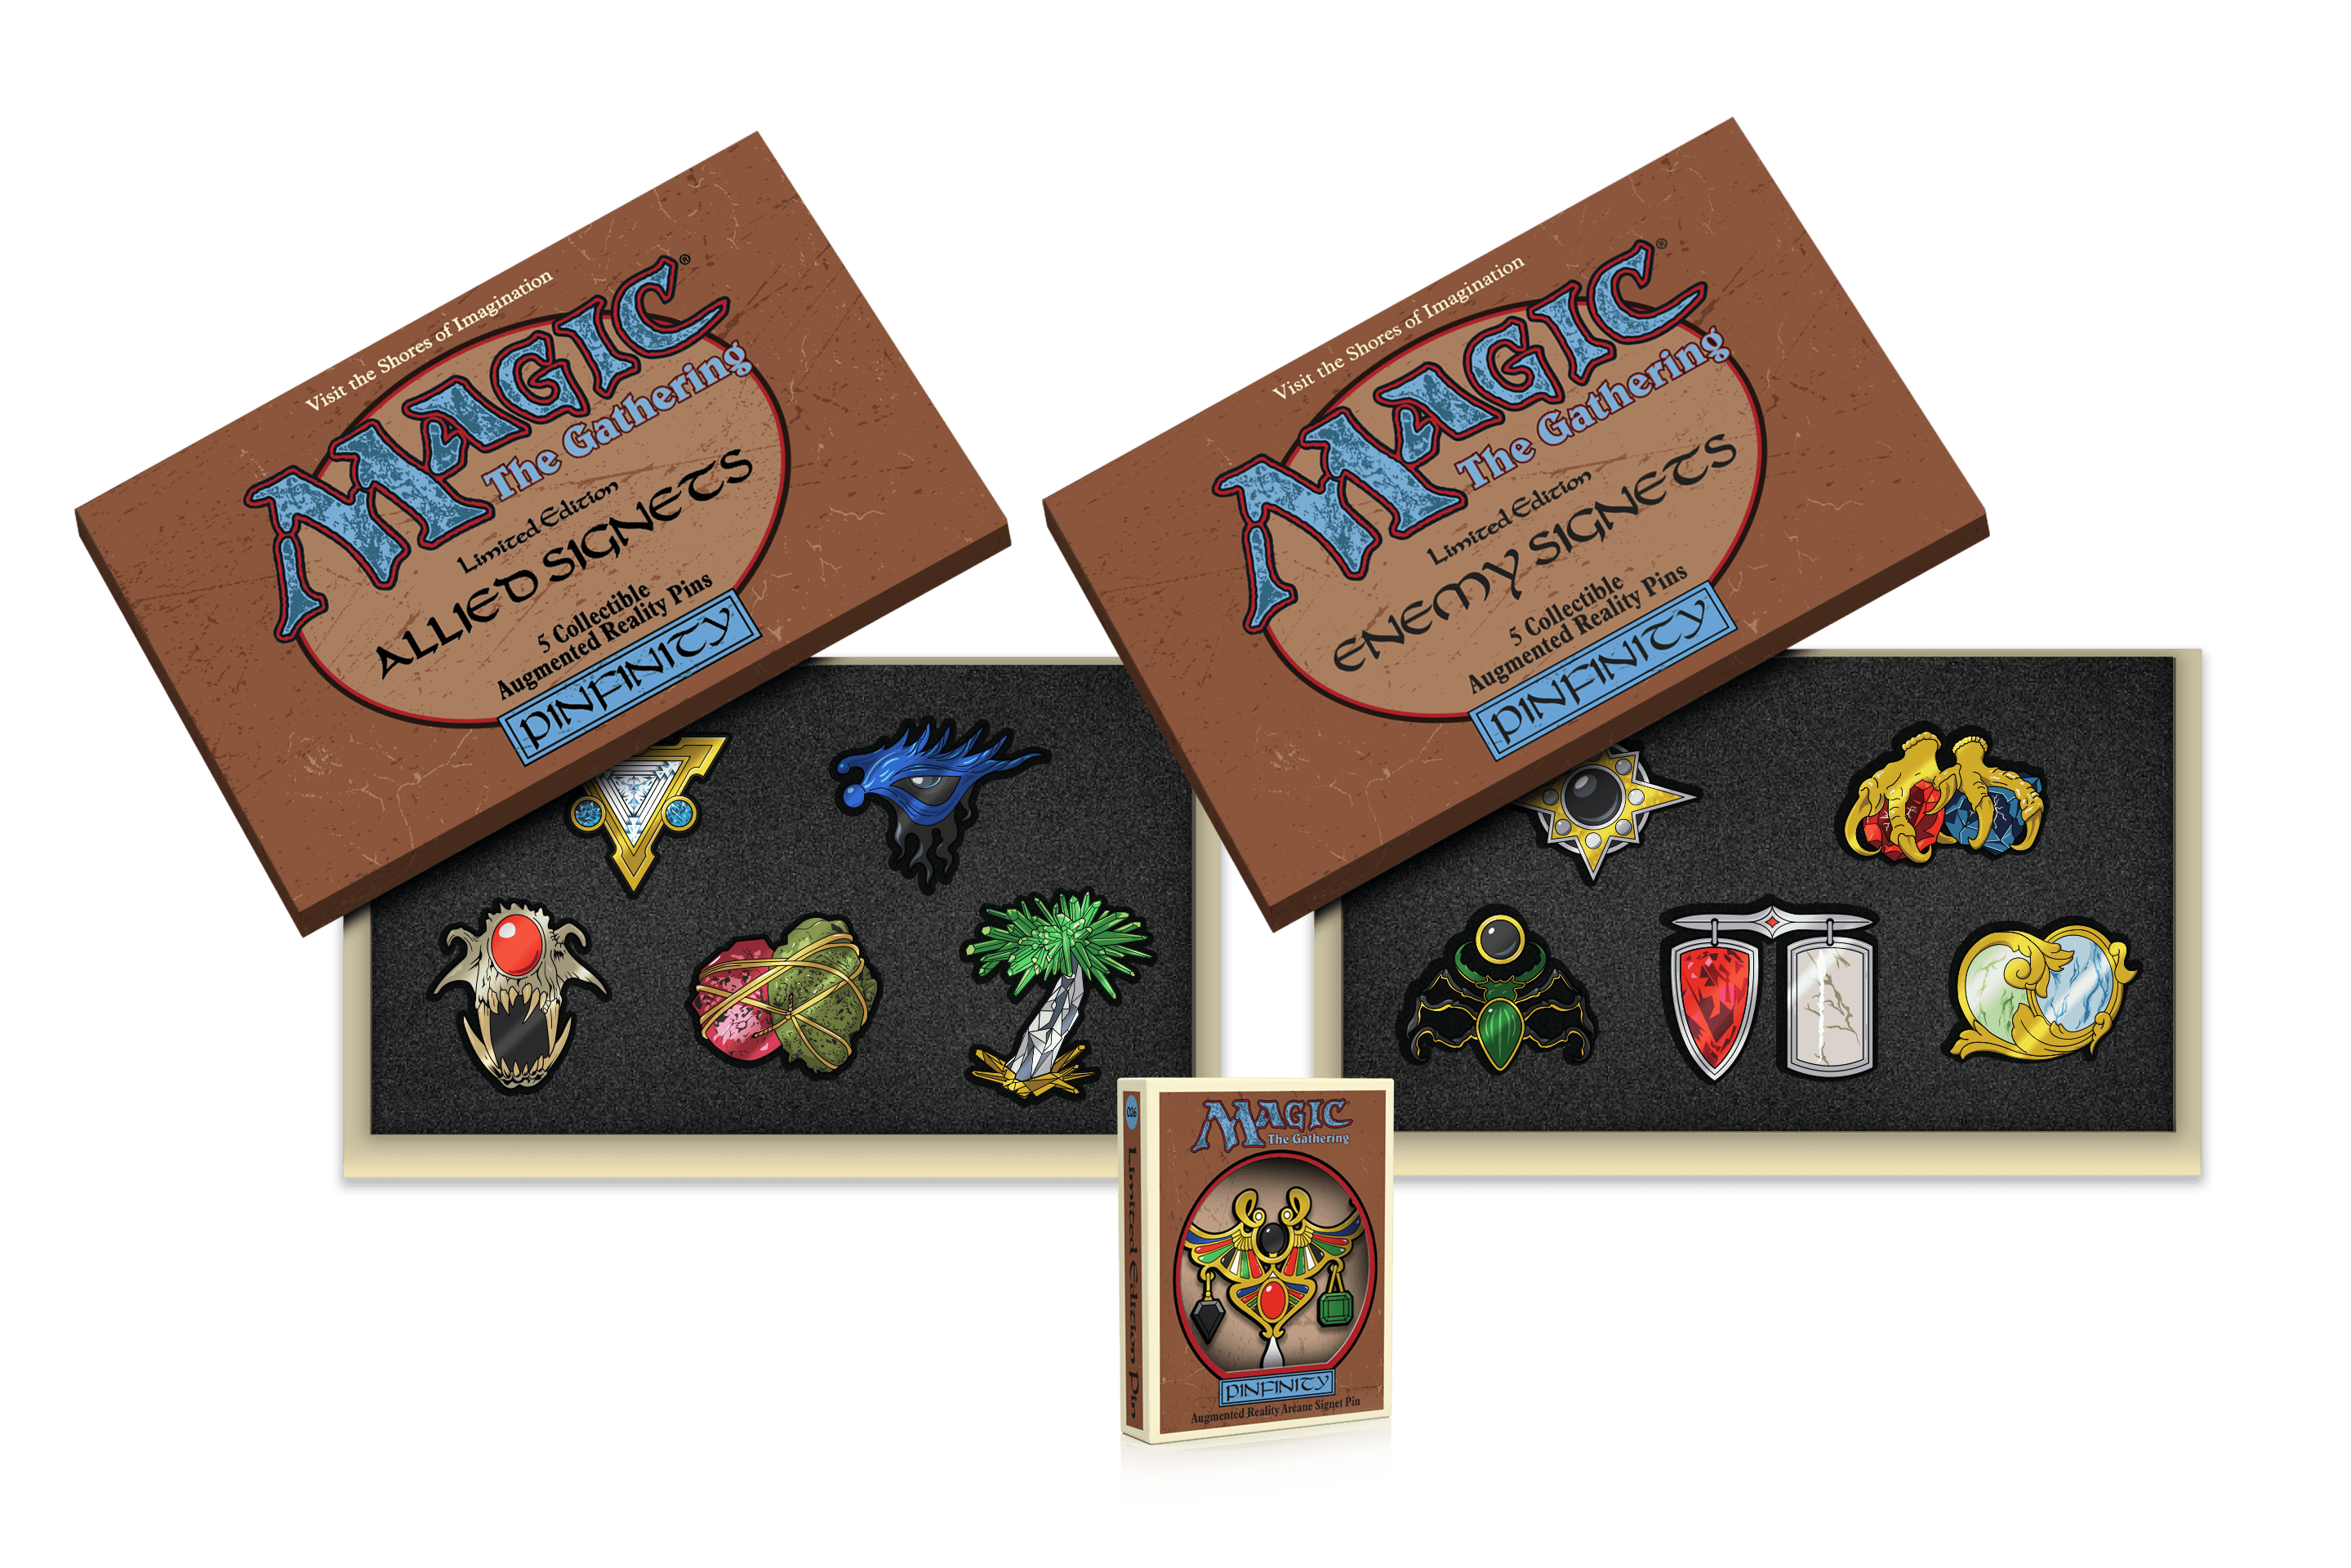 Magic The Gathering AR Pin Previews Exclusive Master Pack Set